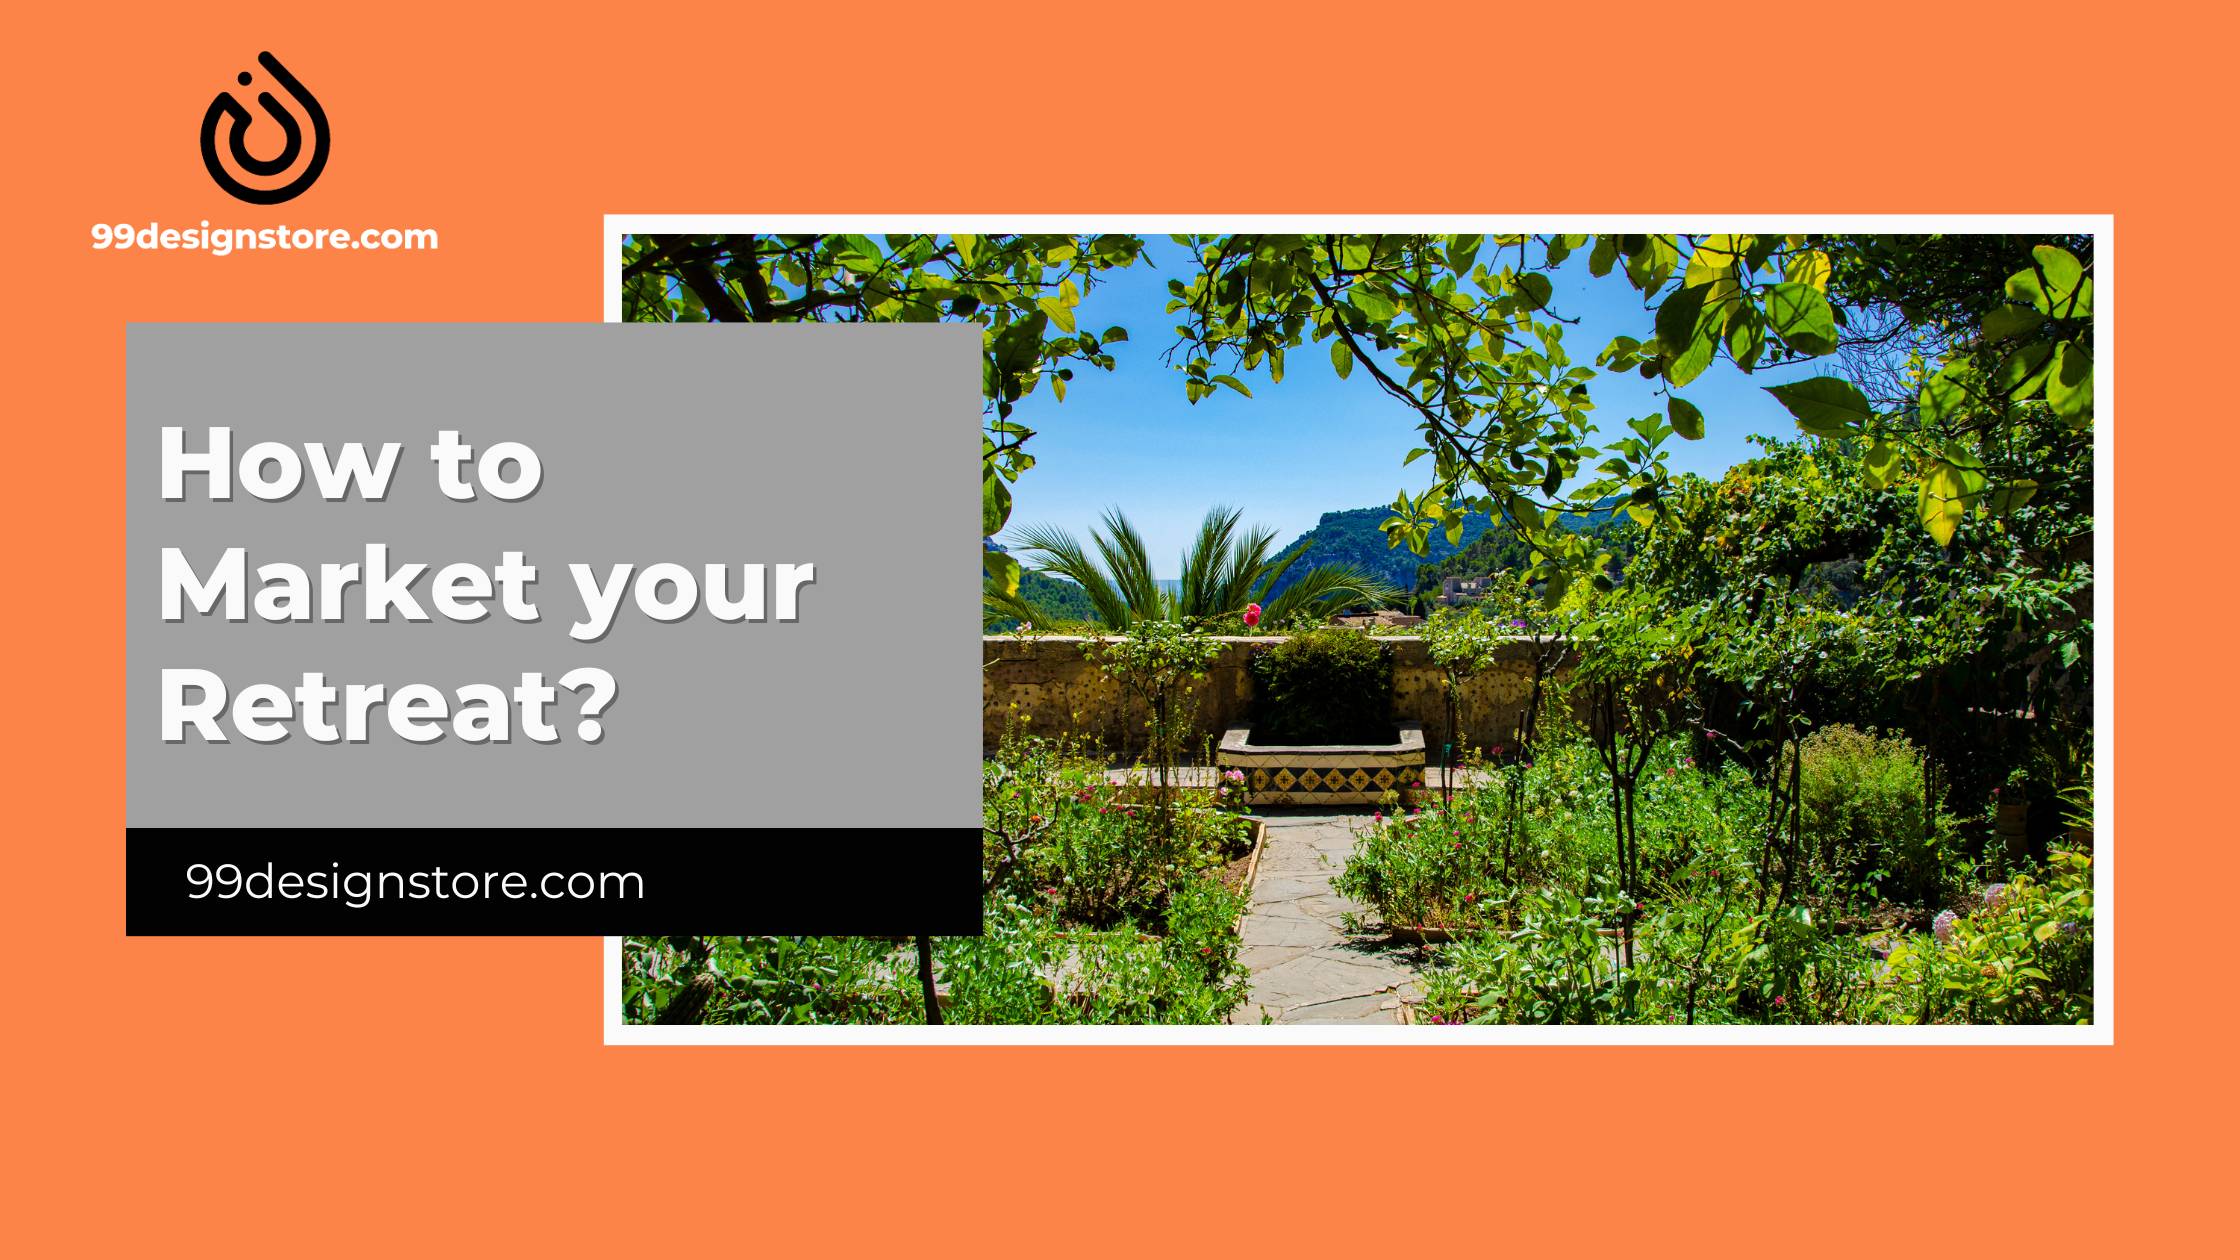 How to Market your Retreat